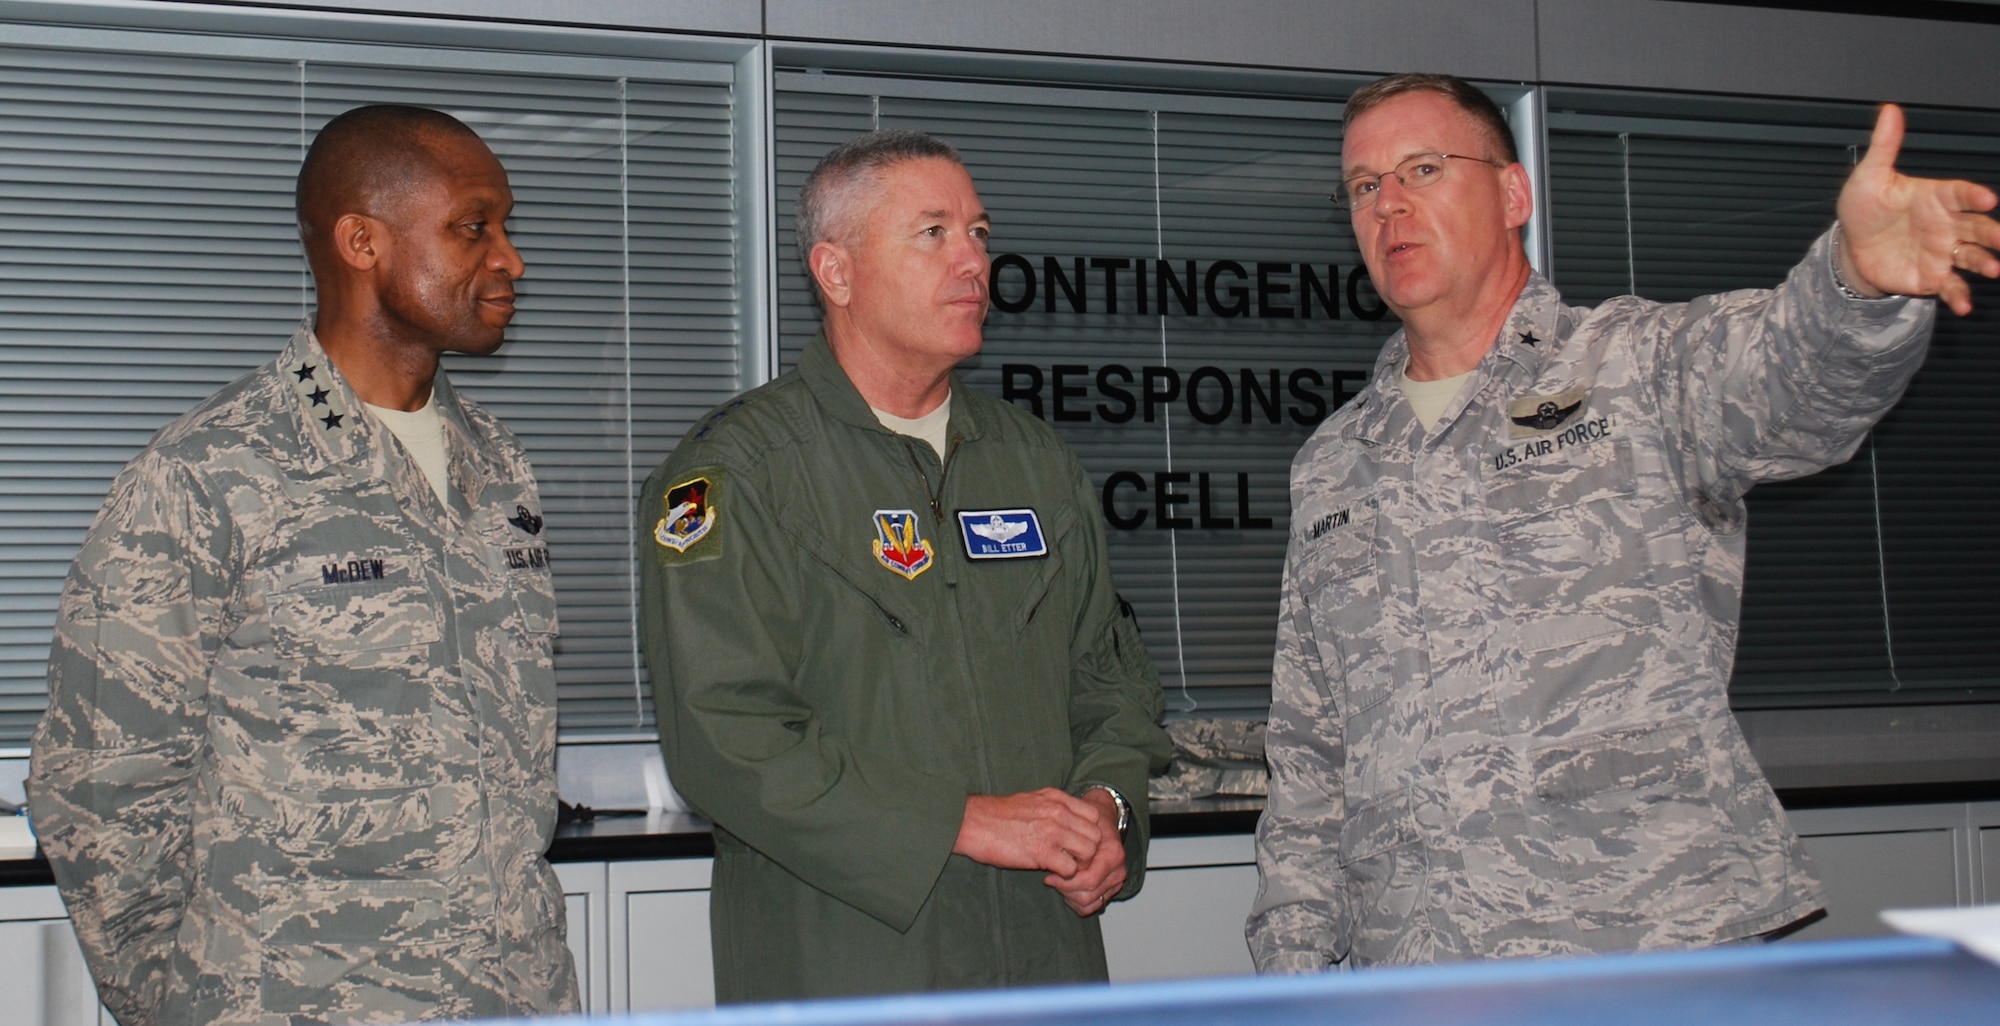 SCOTT AFB, Ill. - Brig. Gen. Larry Martin, Deputy Commander of the 618th Air
and Space Operations Center (Tanker Airlift Control Center), right, briefs
Lt. Gen. William H. Etter, Commander, Continental U.S. North American
Aerospace Defense Command Region - 1st Air Force (Air Forces Northern),
center, and Lt. Gen. Darren McDew, Commander, 18th Air Force, here May 13.
Gen. Etter met with Mobility Airmen and leaders during his visit, expressing
appreciation for their support of his command’s role as the air component of
U.S. Northern Command. (U.S. Air Force Photo by Capt. Mauri Slater)
